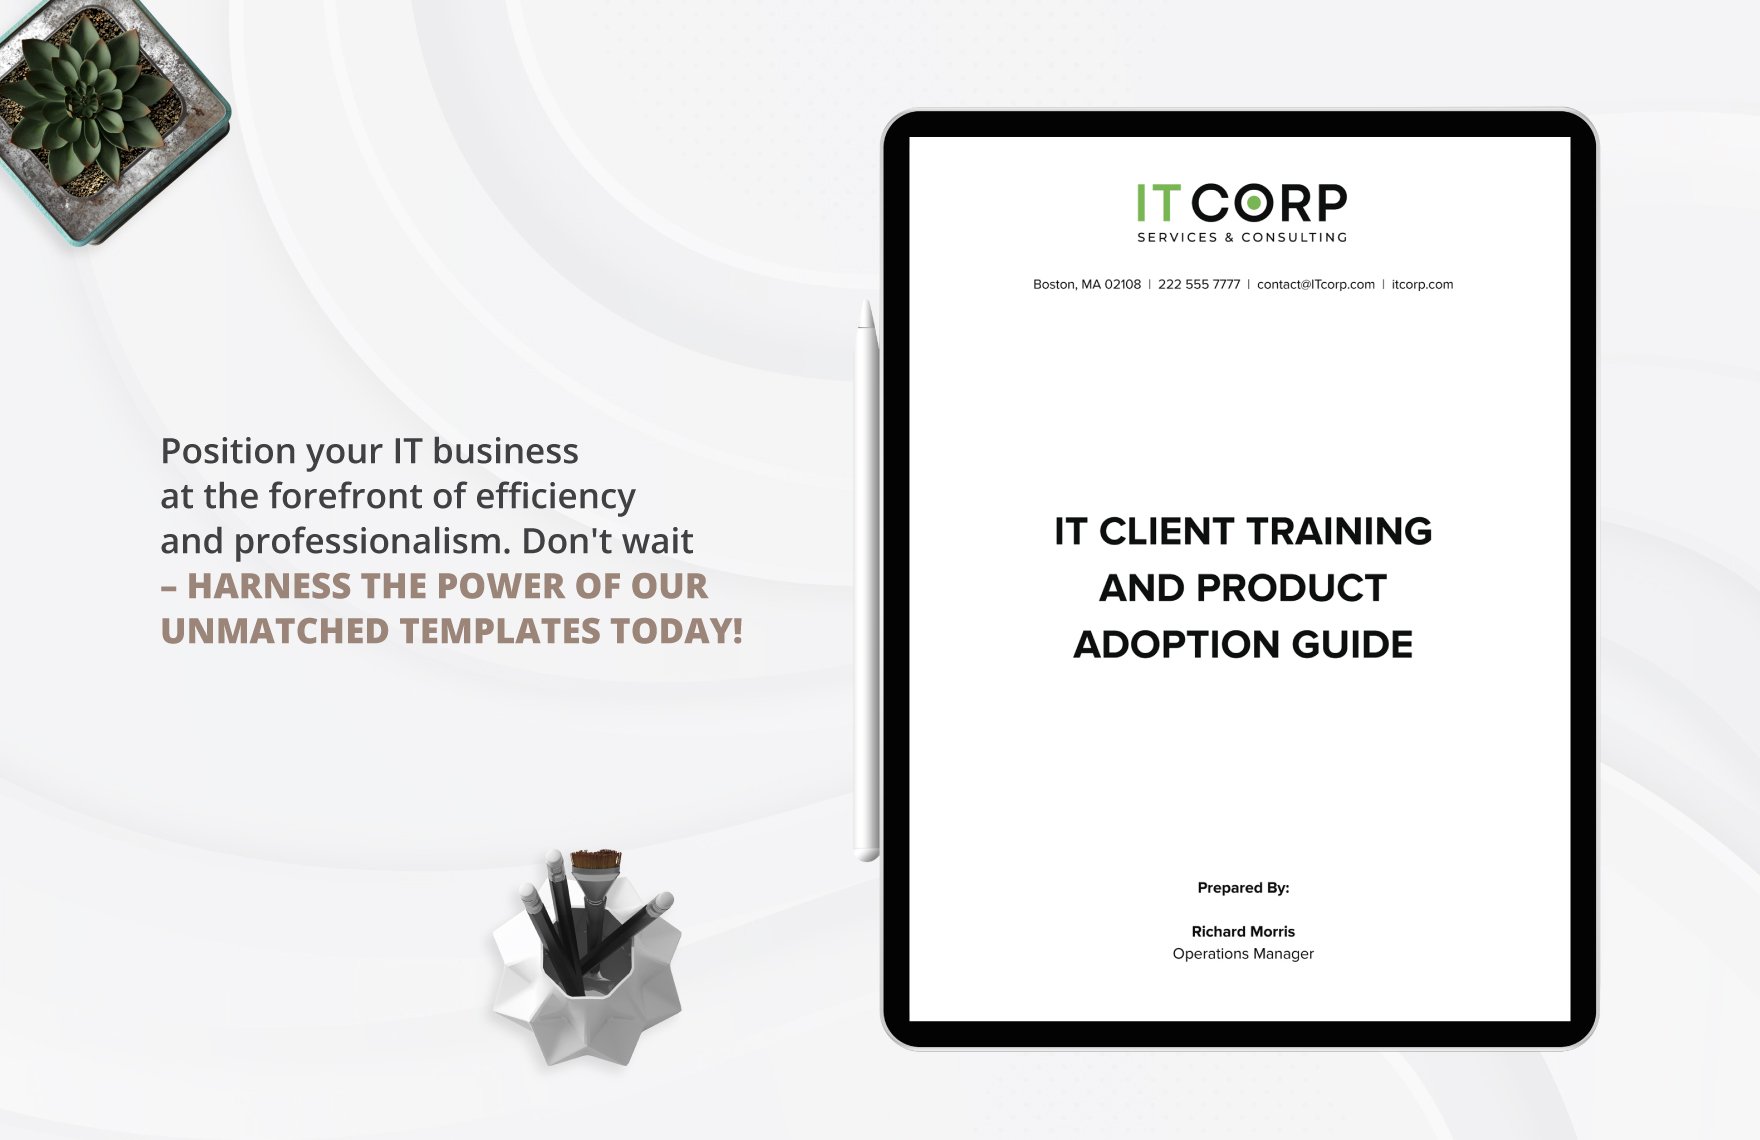 IT Client Training and Product Adoption Guide Template